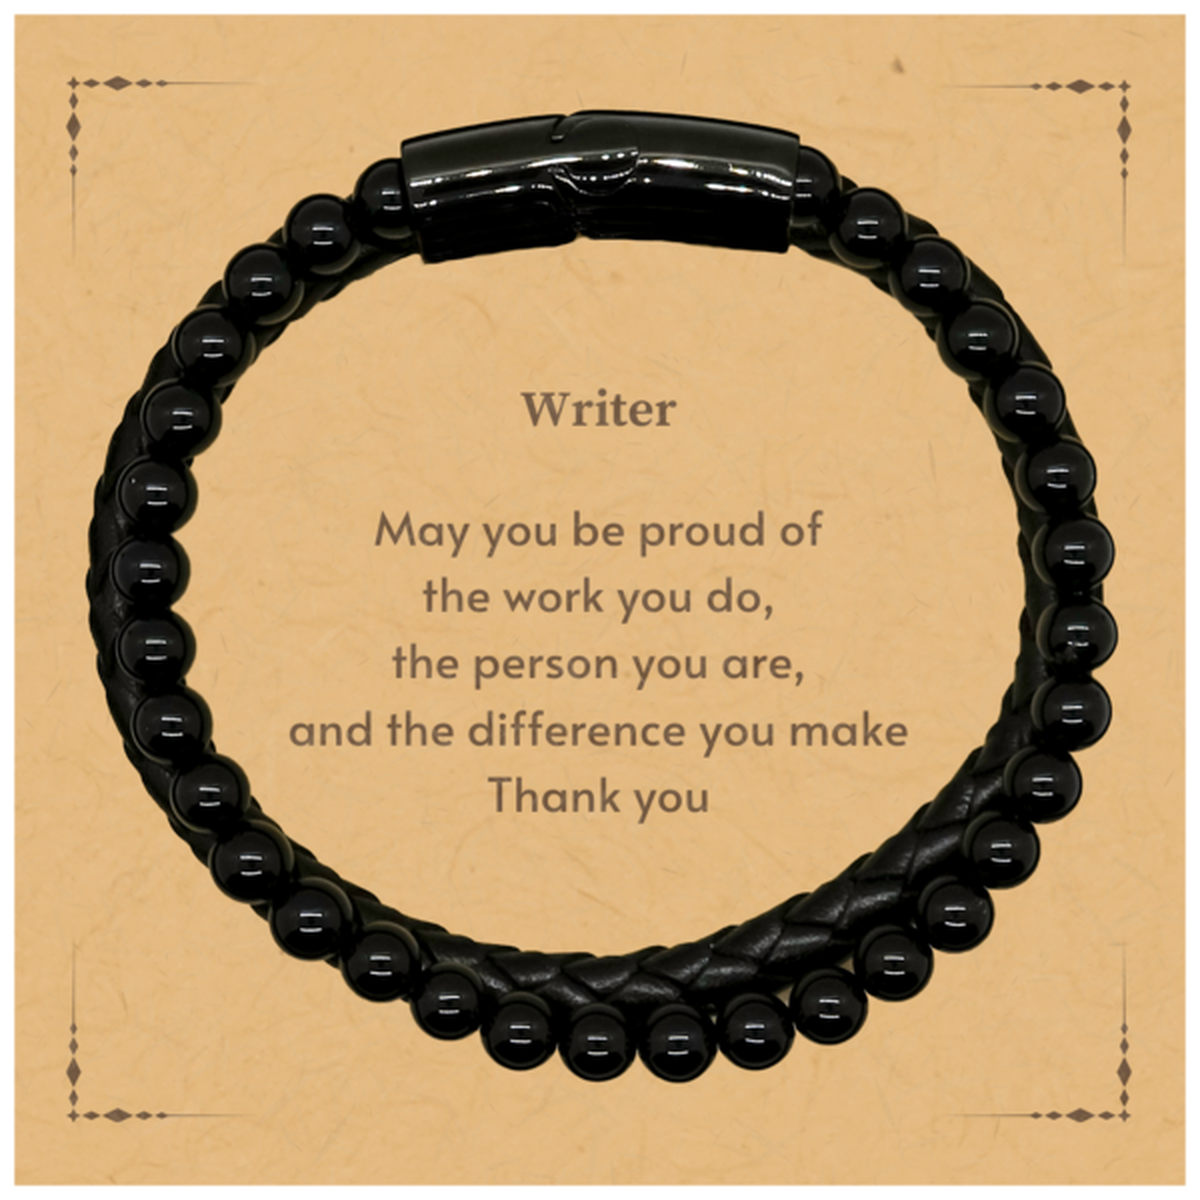 Heartwarming Stone Leather Bracelets Retirement Coworkers Gifts for Writer, Writer May You be proud of the work you do, the person you are Gifts for Boss Men Women Friends